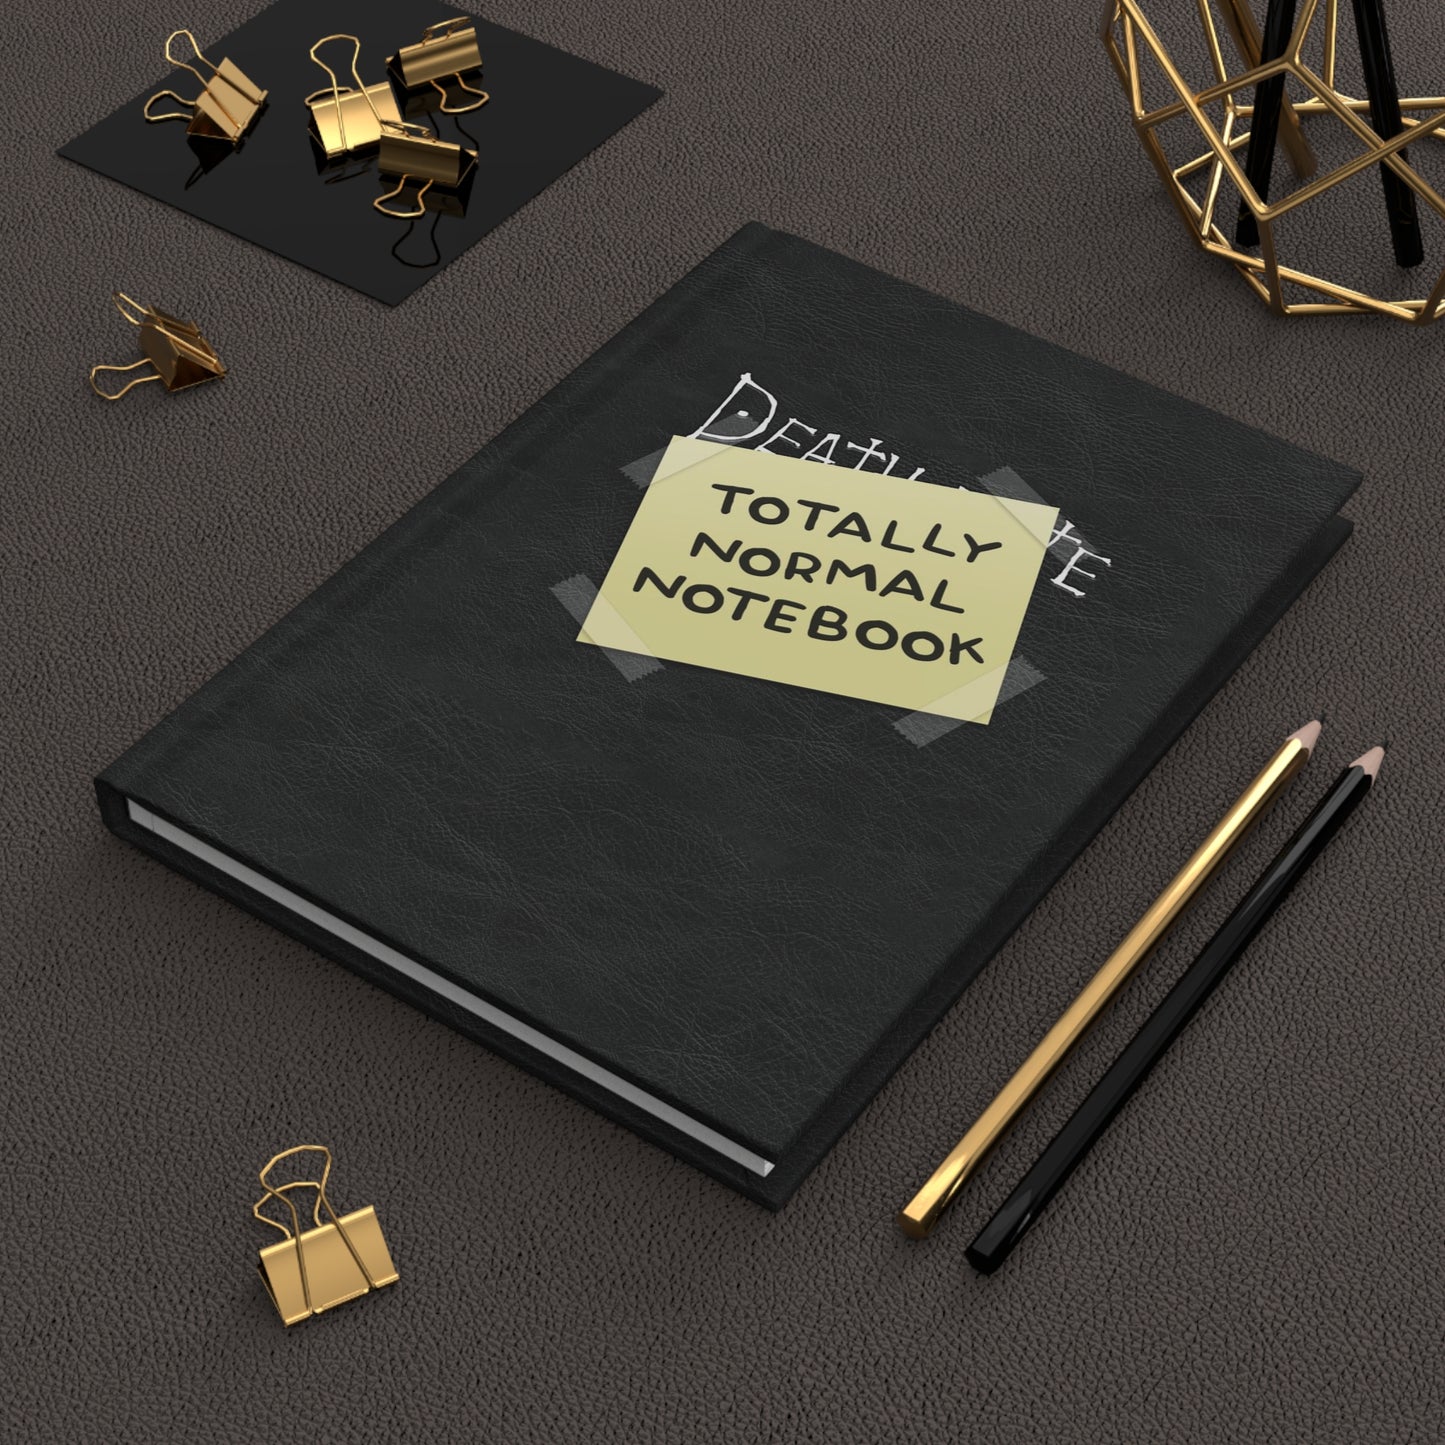 Totally Normal Notebook